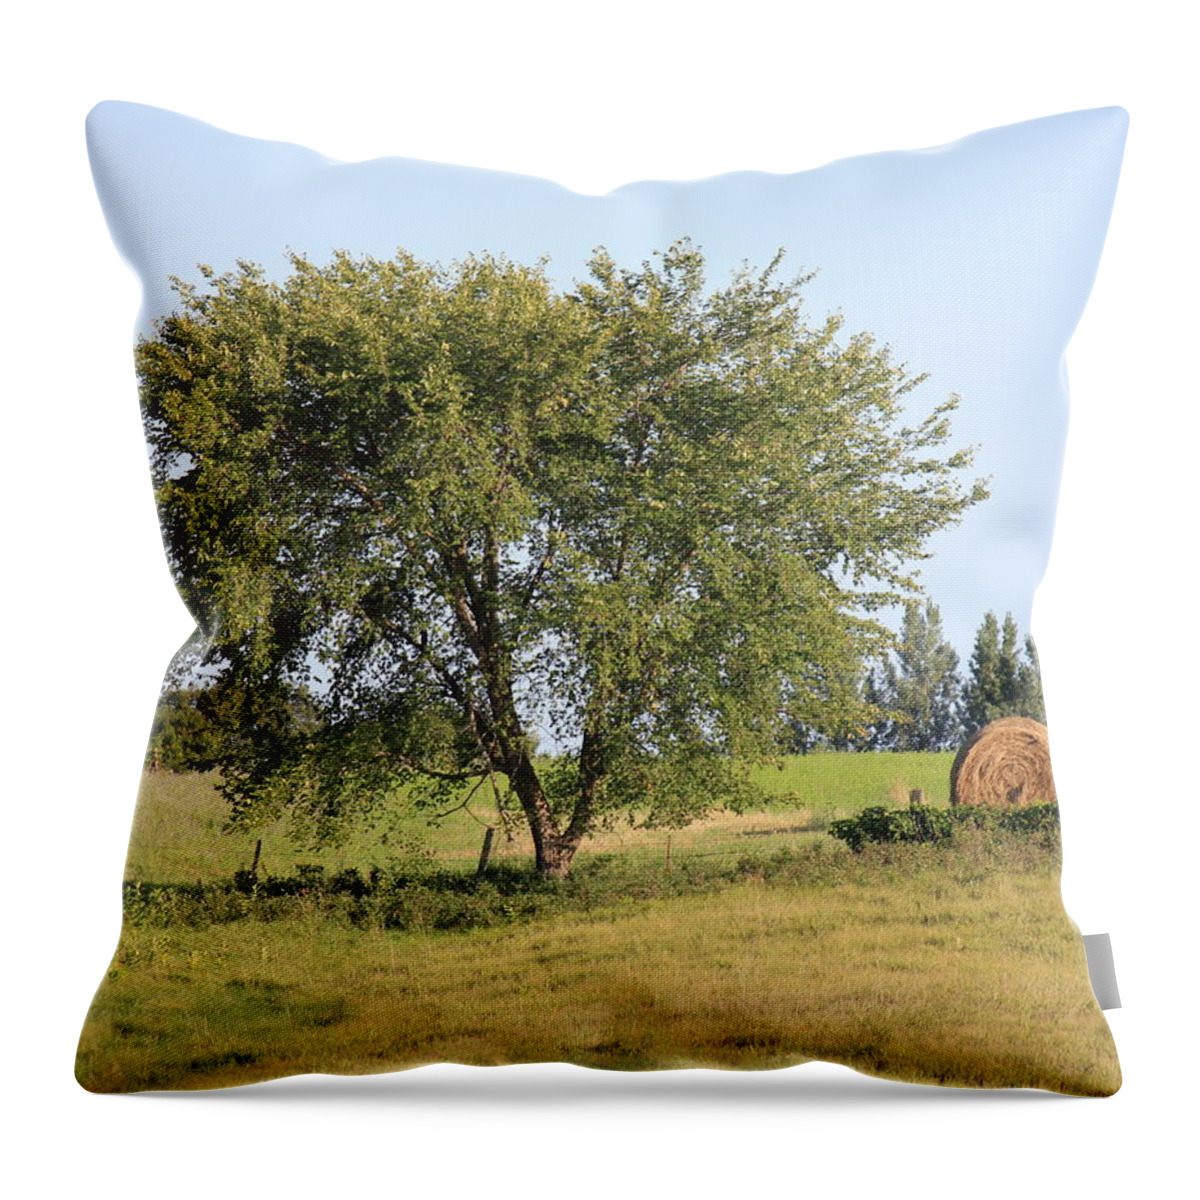 Tree Throw Pillow featuring the photograph Country Scene by Penny Meyers